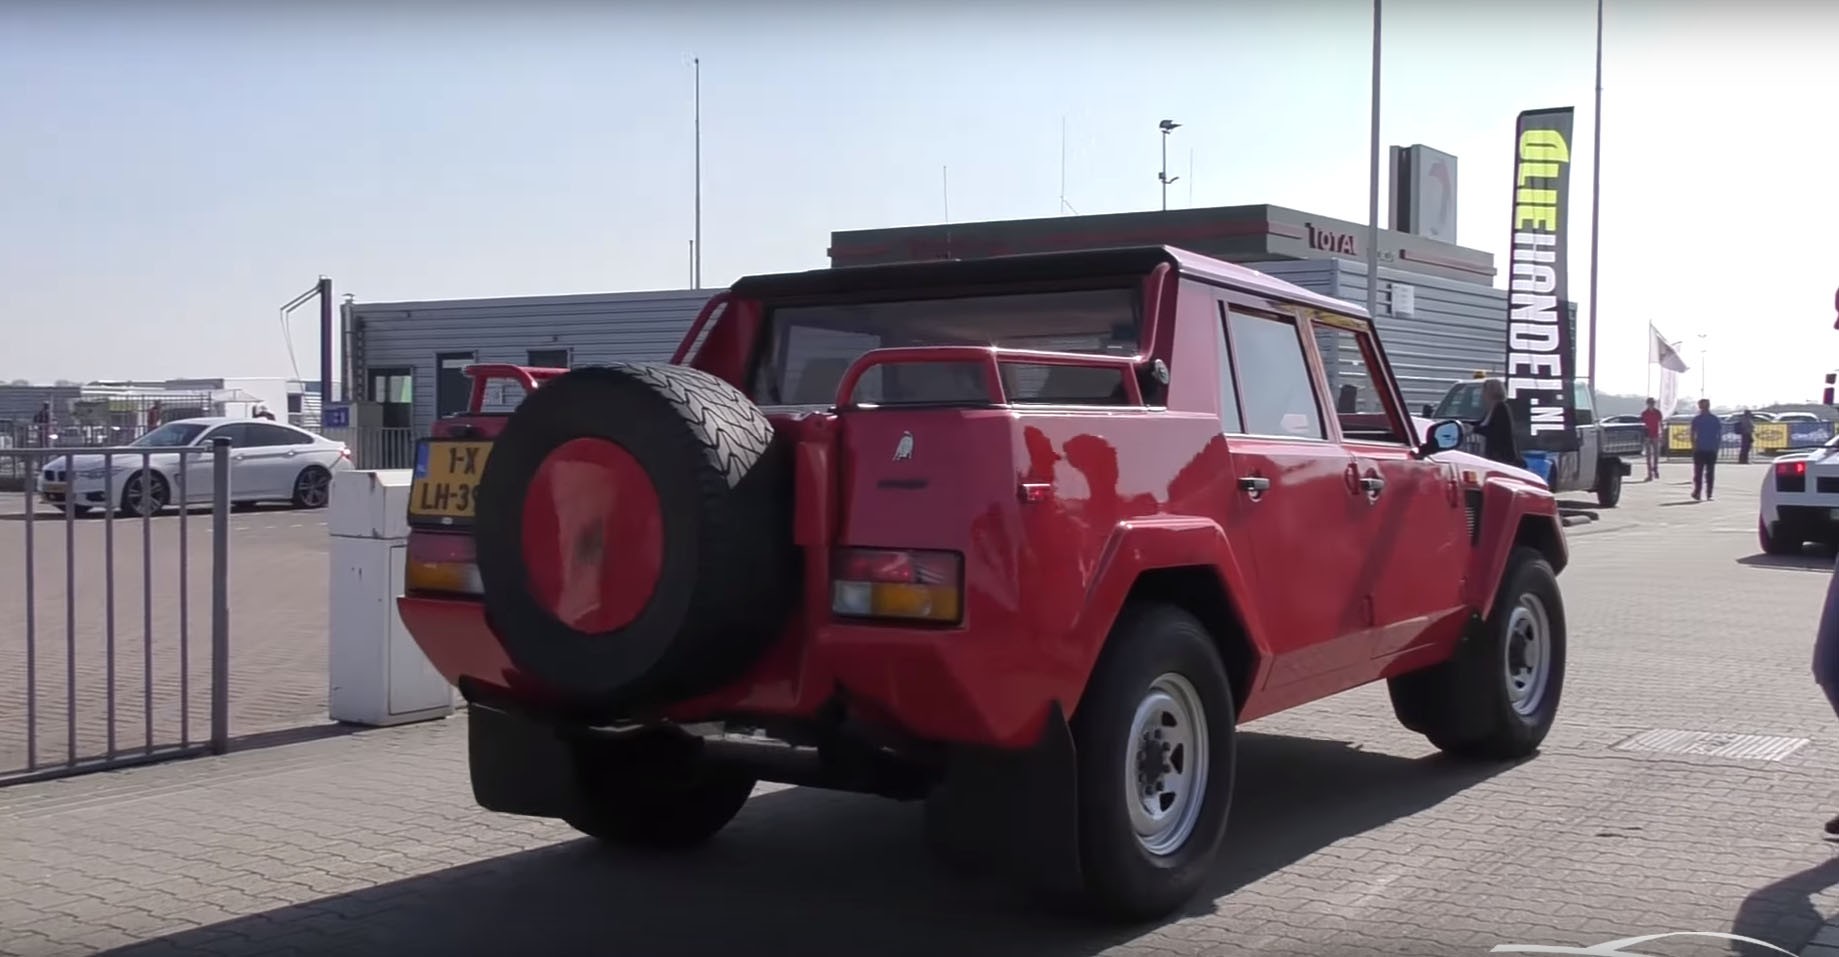 Showing Up in a Lambo LM002 at a Supercar Convention Is ...